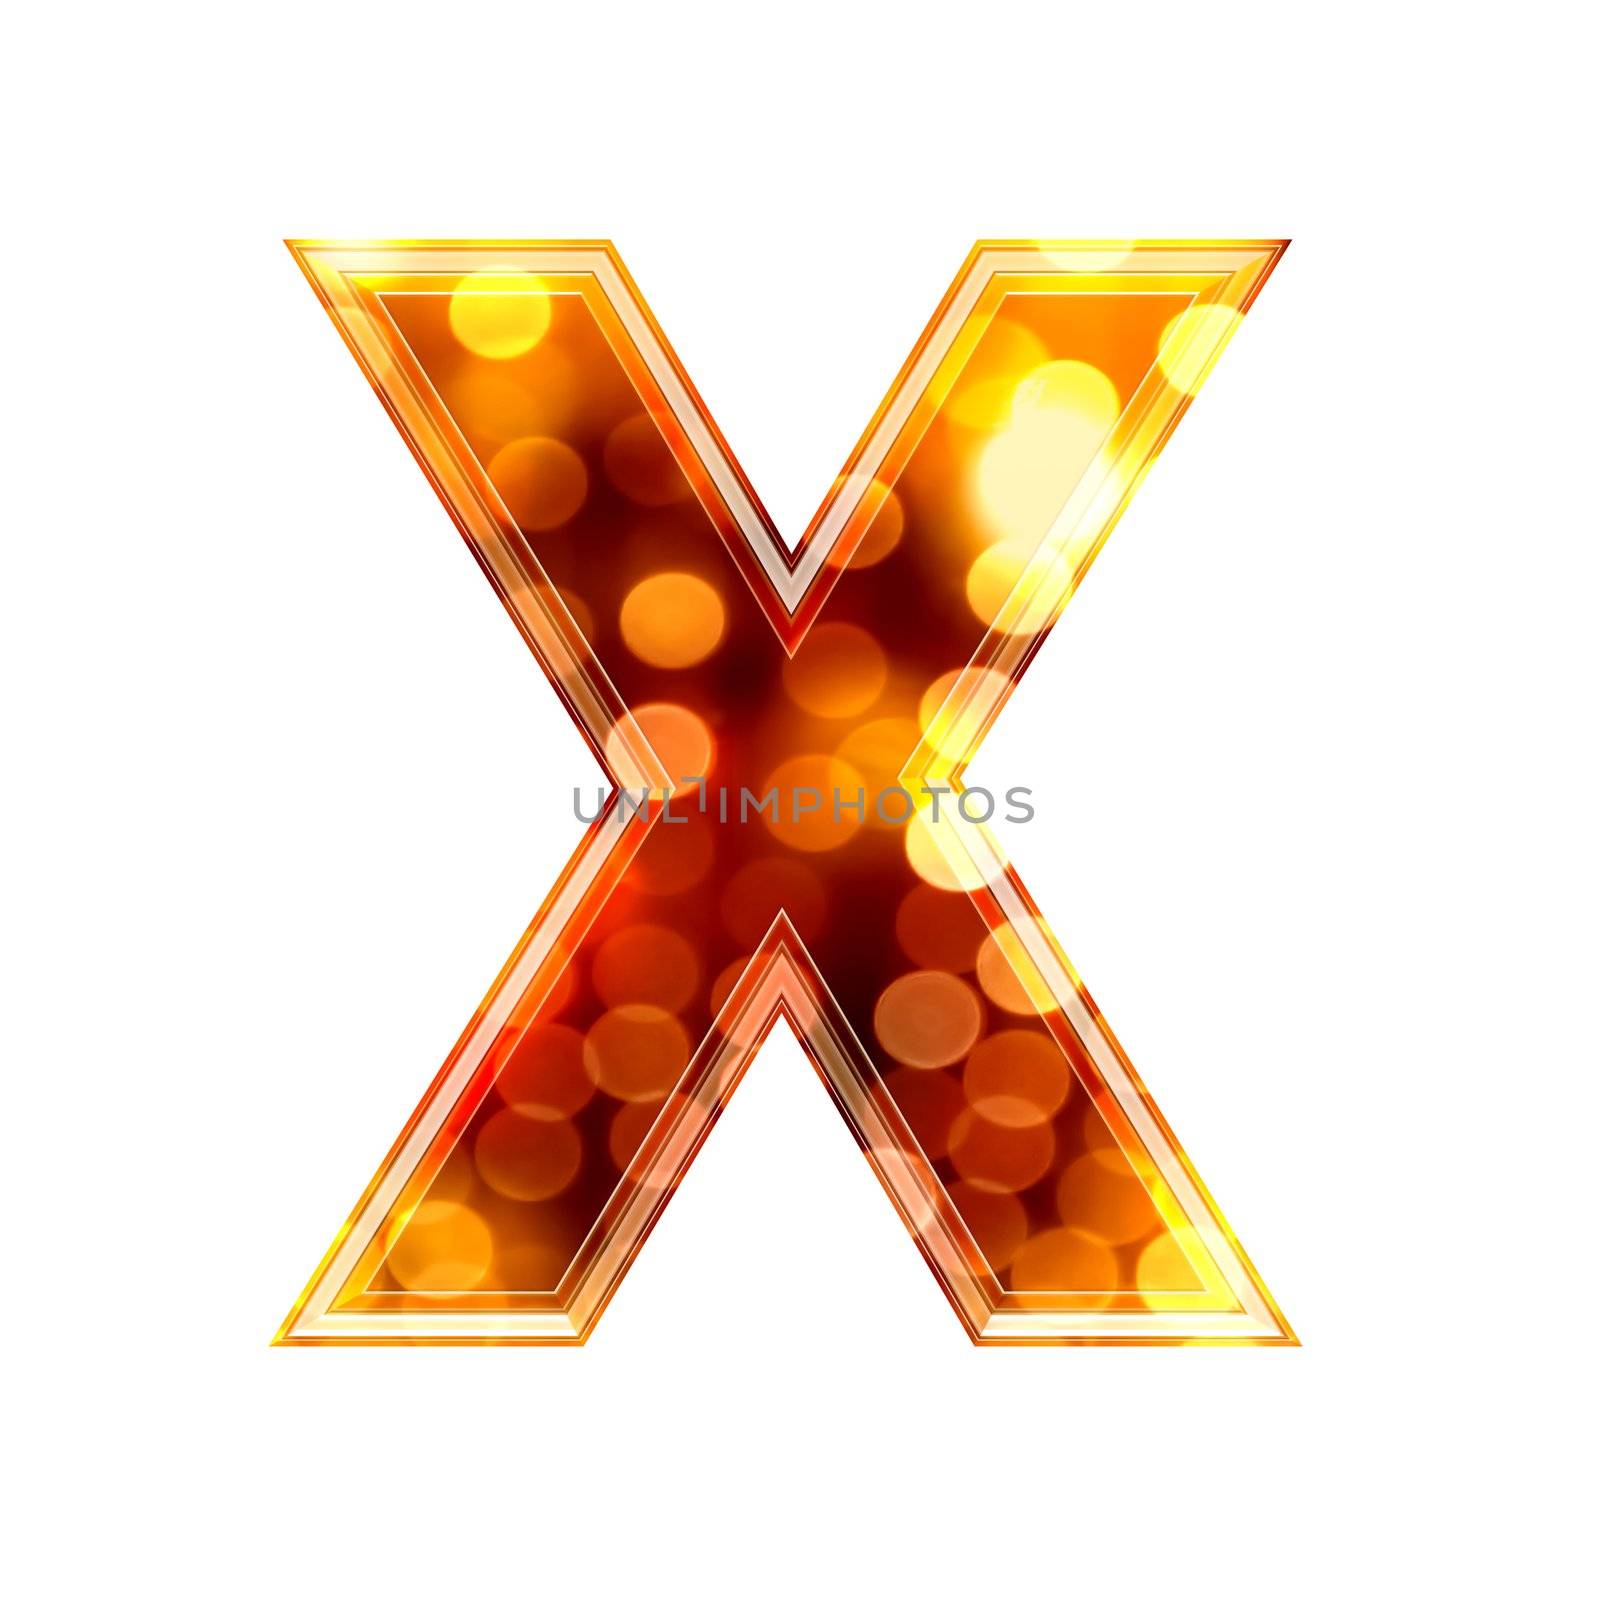 3d letter with glowing lights texture - X by chrisroll